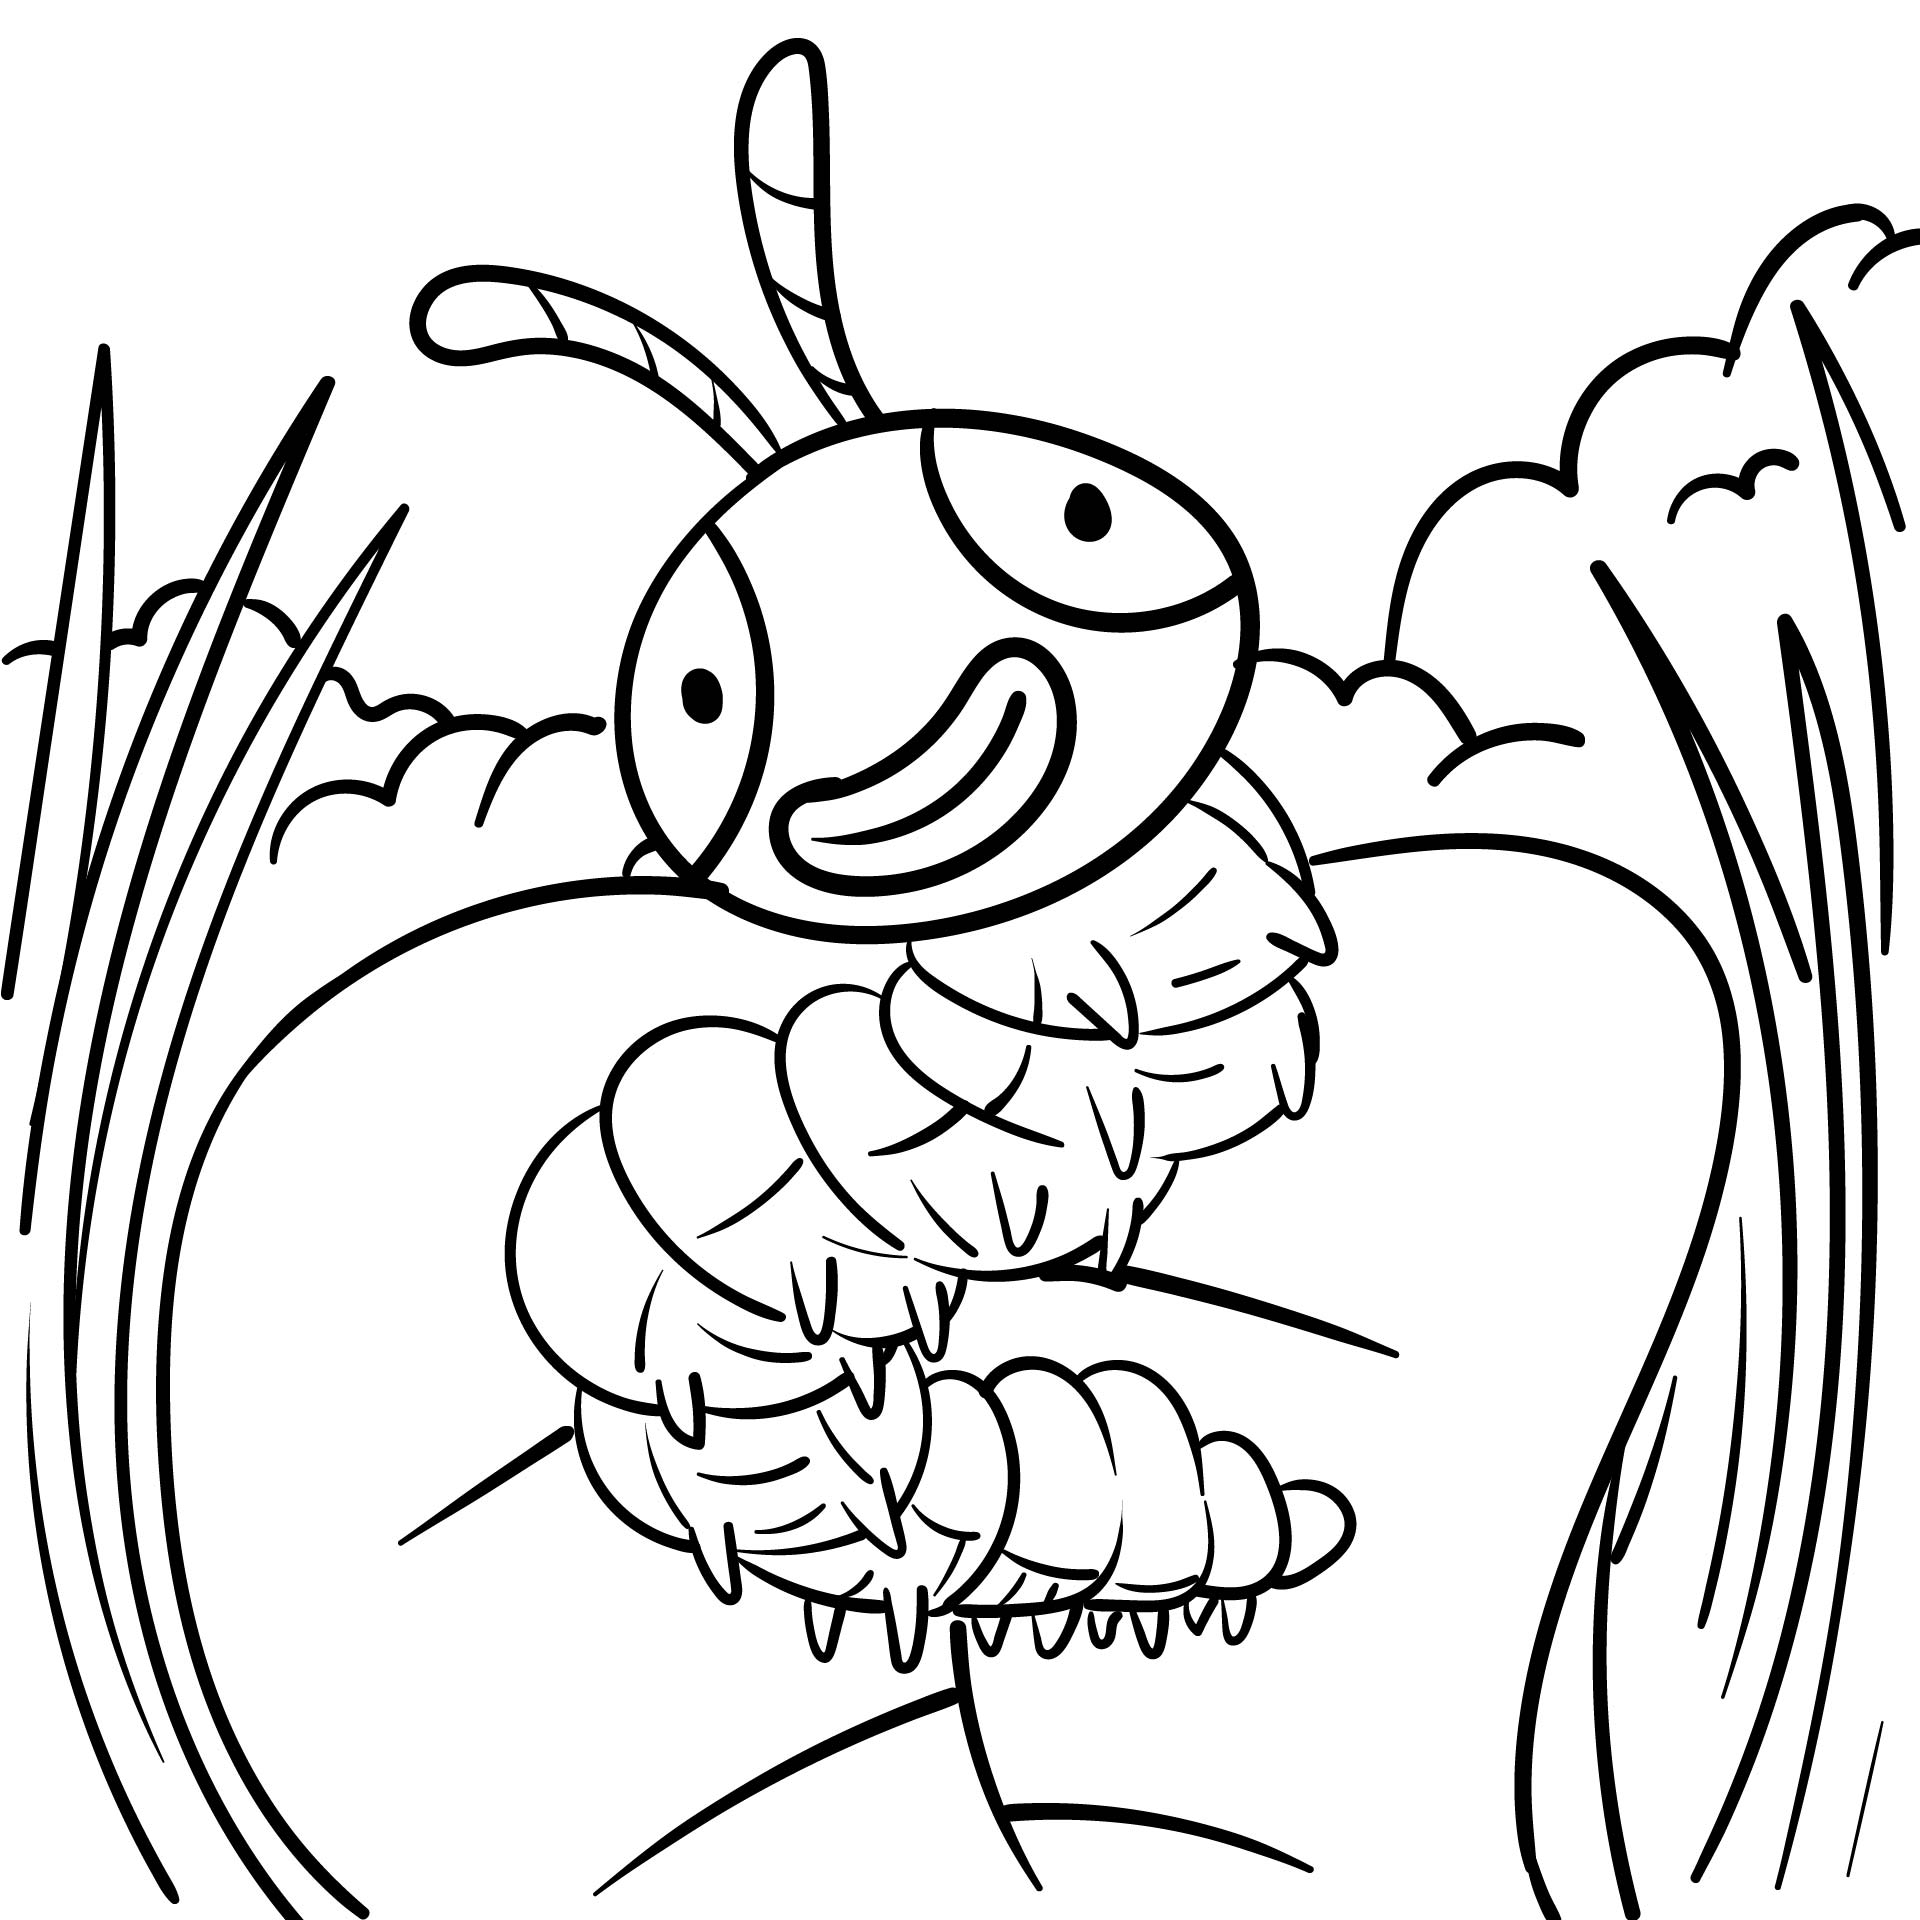 Printable Caterpillar Coloring Pages for Kids